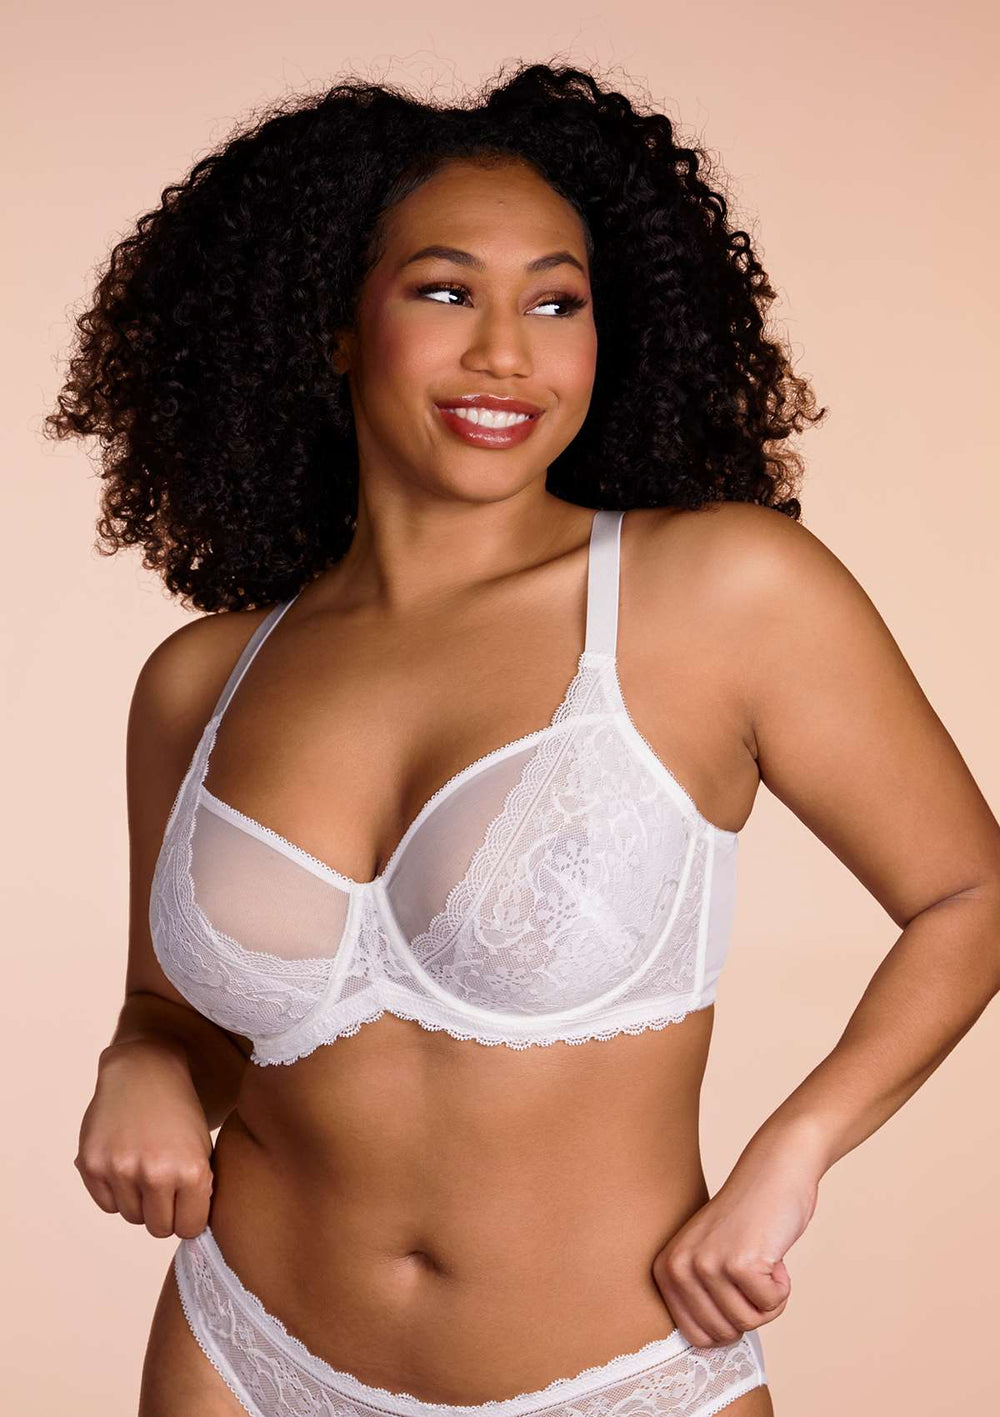 Anemone Unlined Dolphin Lace Underwire Bra